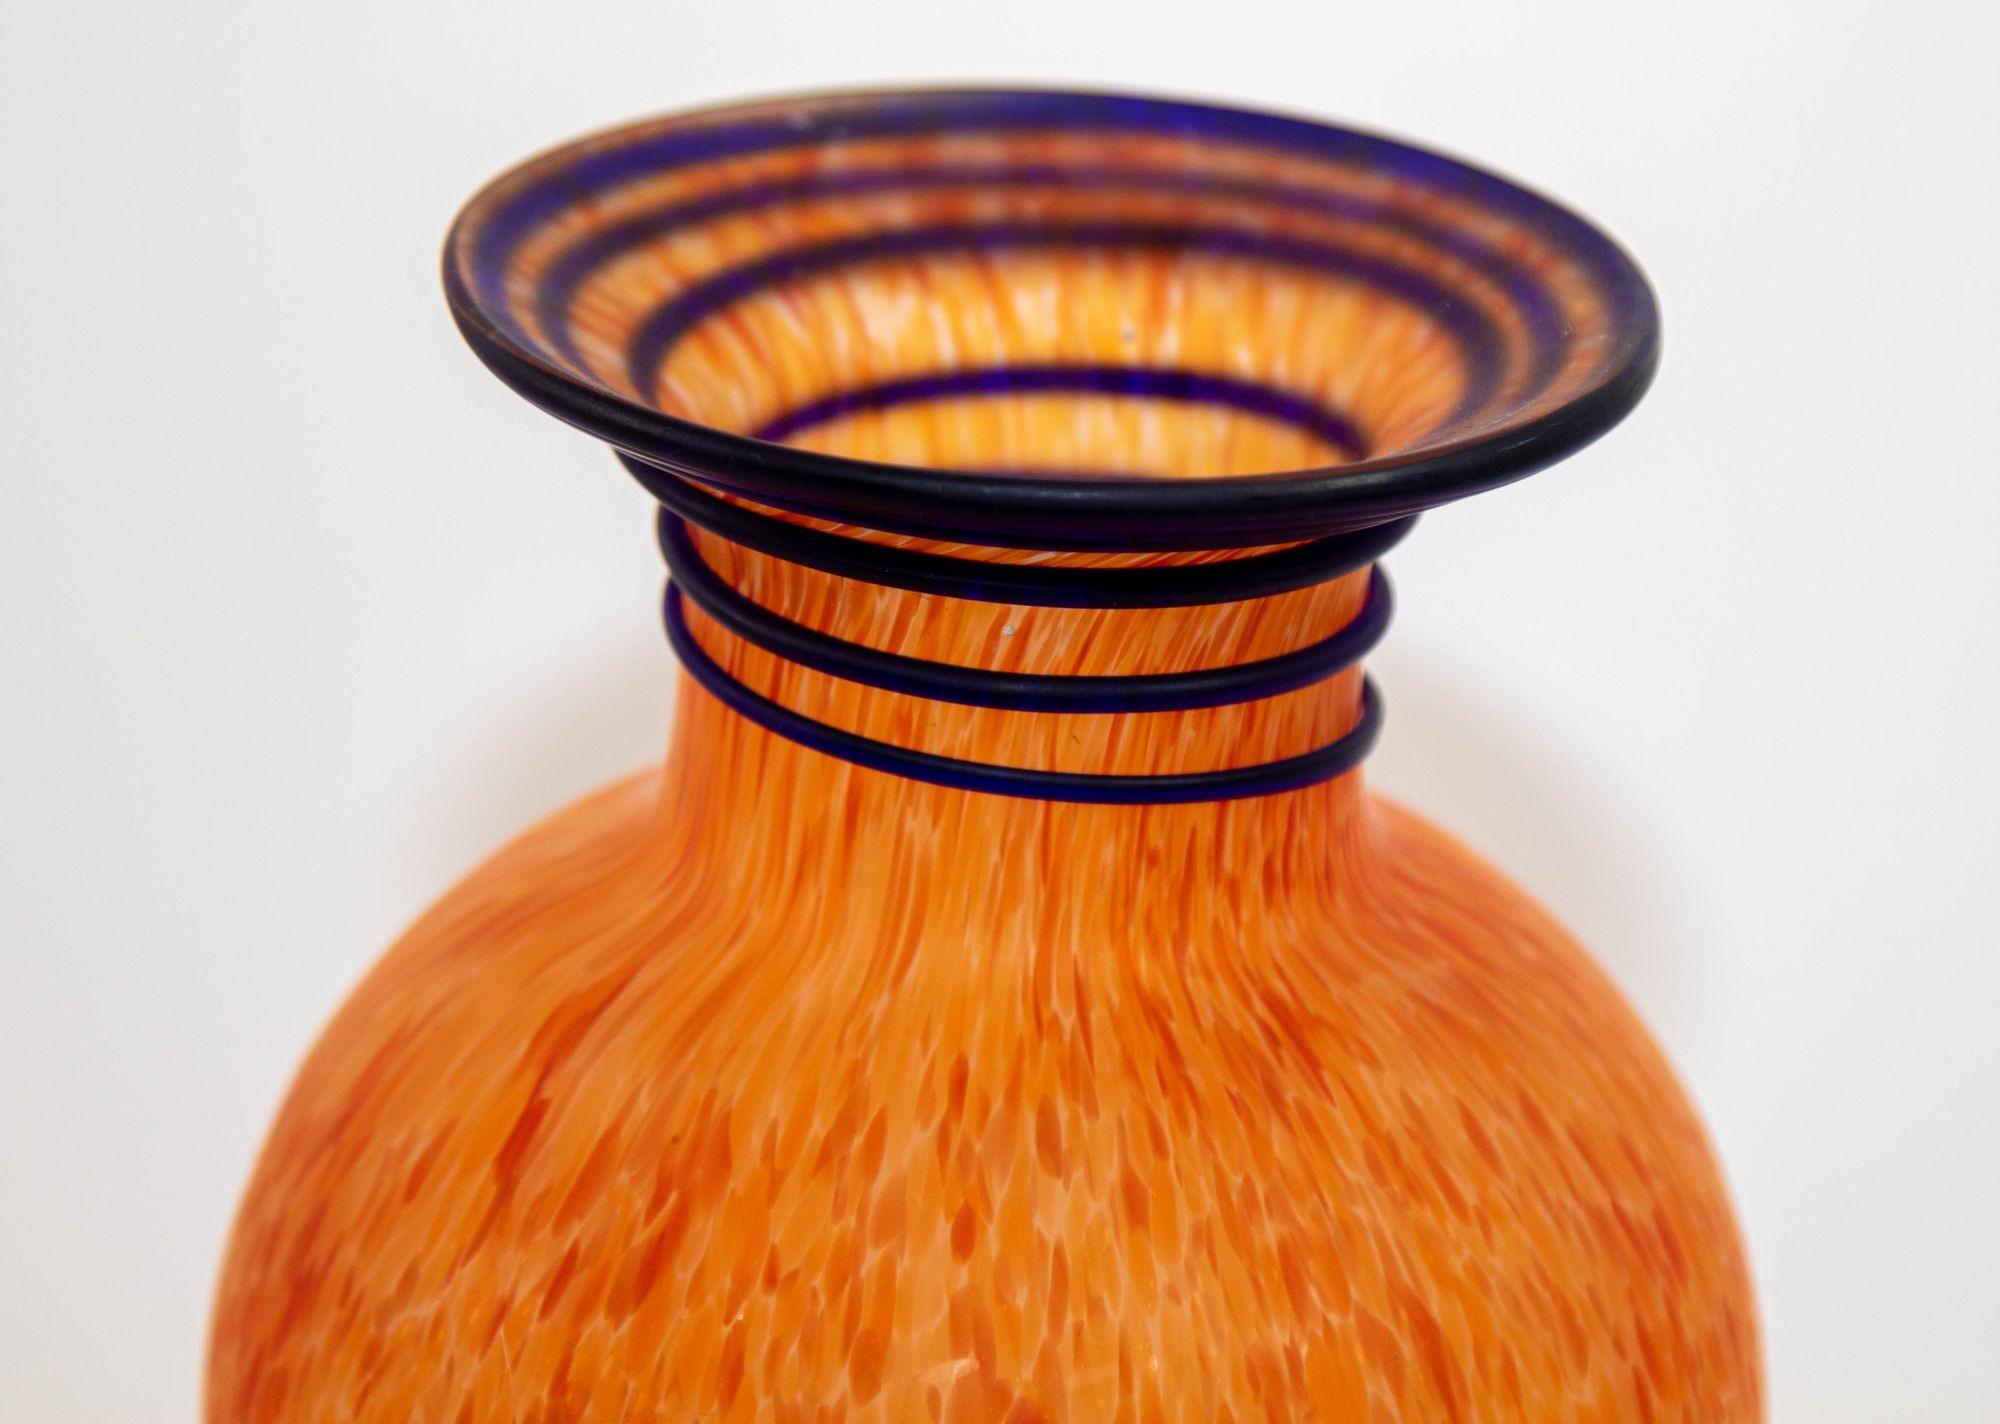 Murano Italian Art multi-color confetti glass vase, urn shaped vase, Italy.
1960s Vintage beautiful urn shape delicate hand blown Italian art glass vase with speckled orange with a blue spiral stripe on top of the neck.
Lovely to be used as